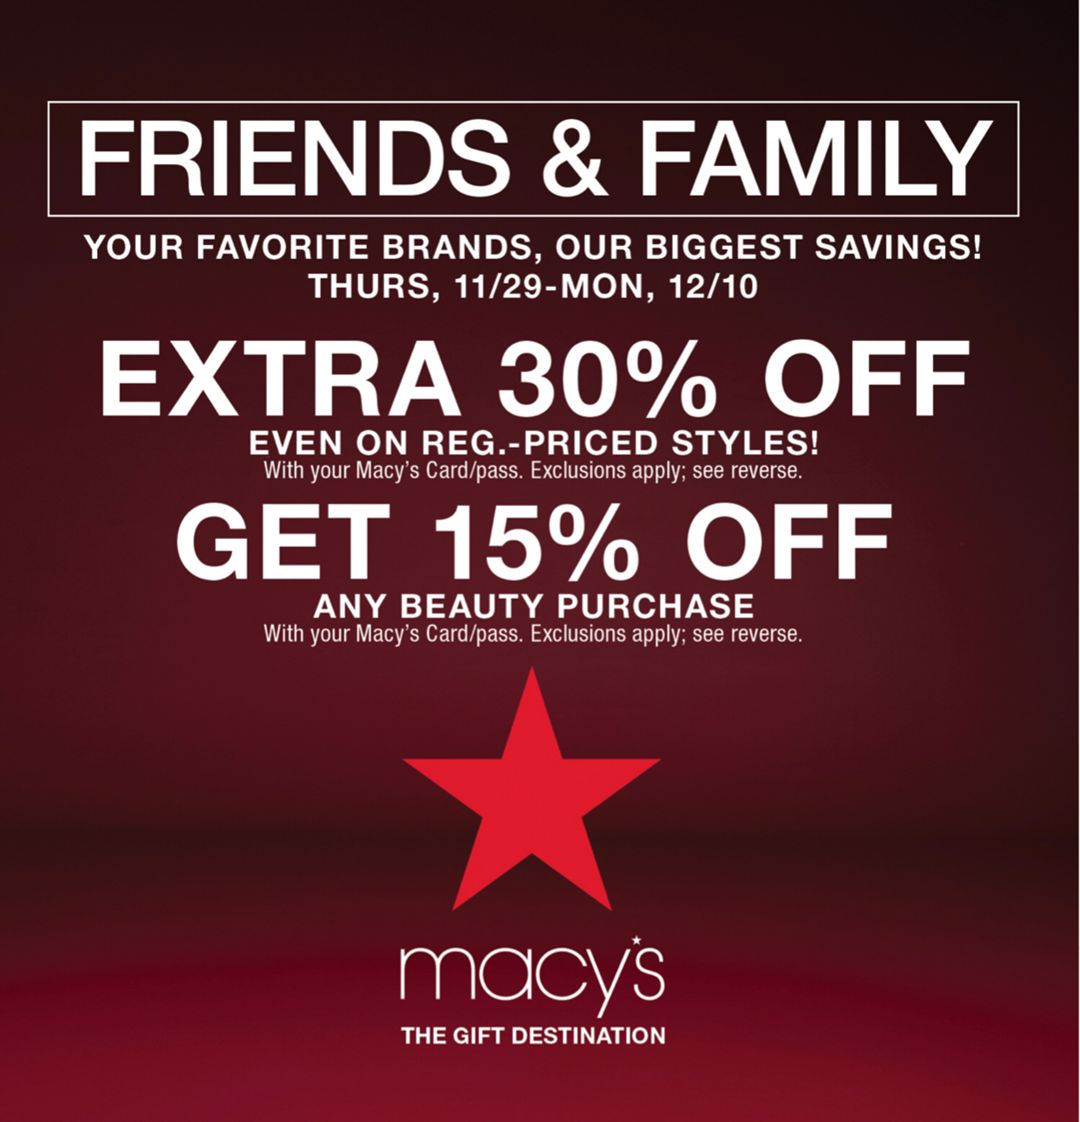 15% off Beauty/Fragrance during Macy's Friends & Family - Macys Style Crew